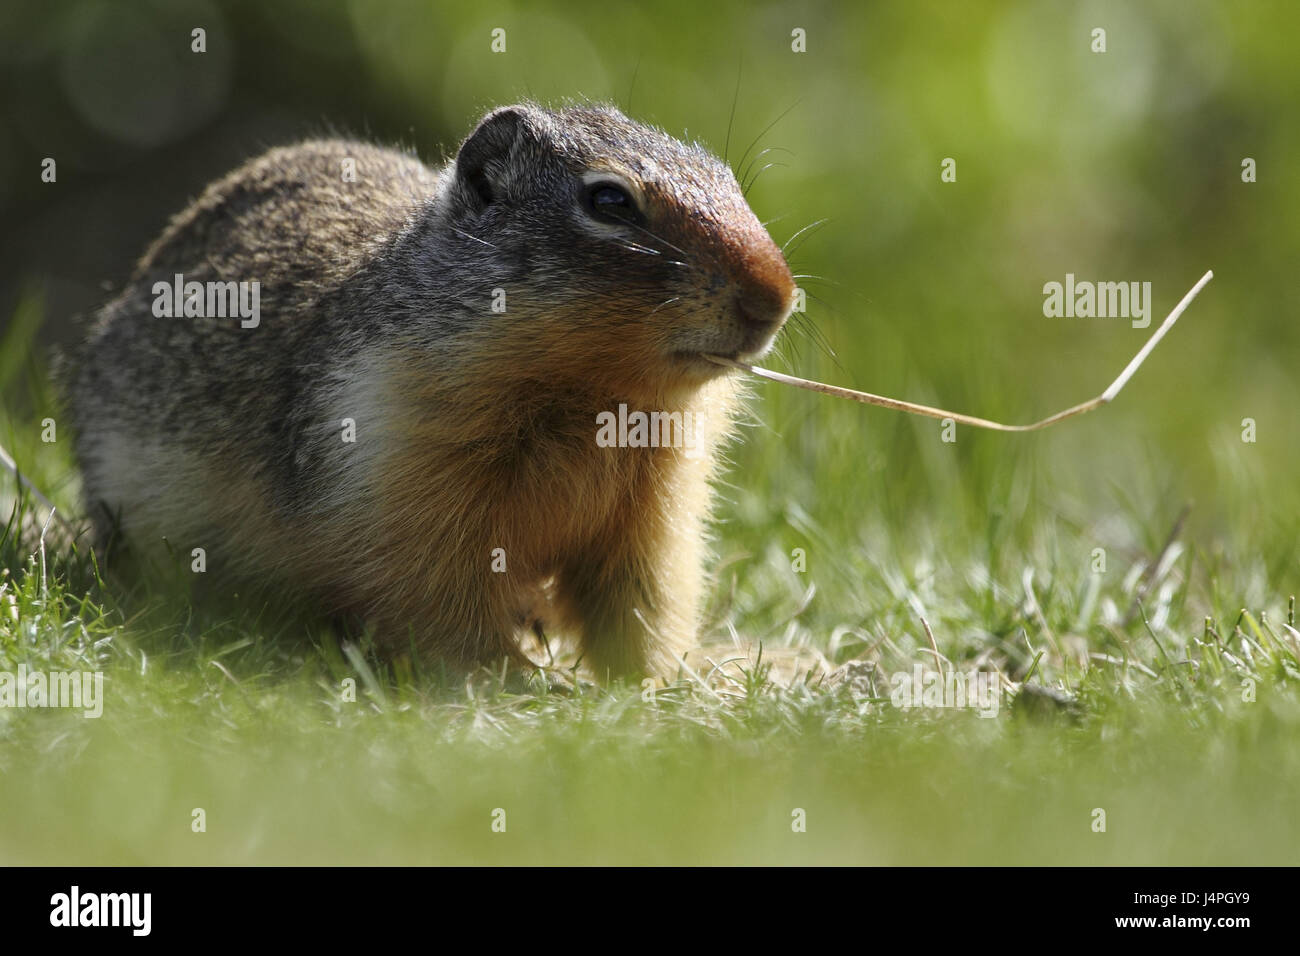 Gophers, Columbia Ground Squirrel, Spermophilus columbianus, alto animal, seated on meadow with stalk Stock Photo